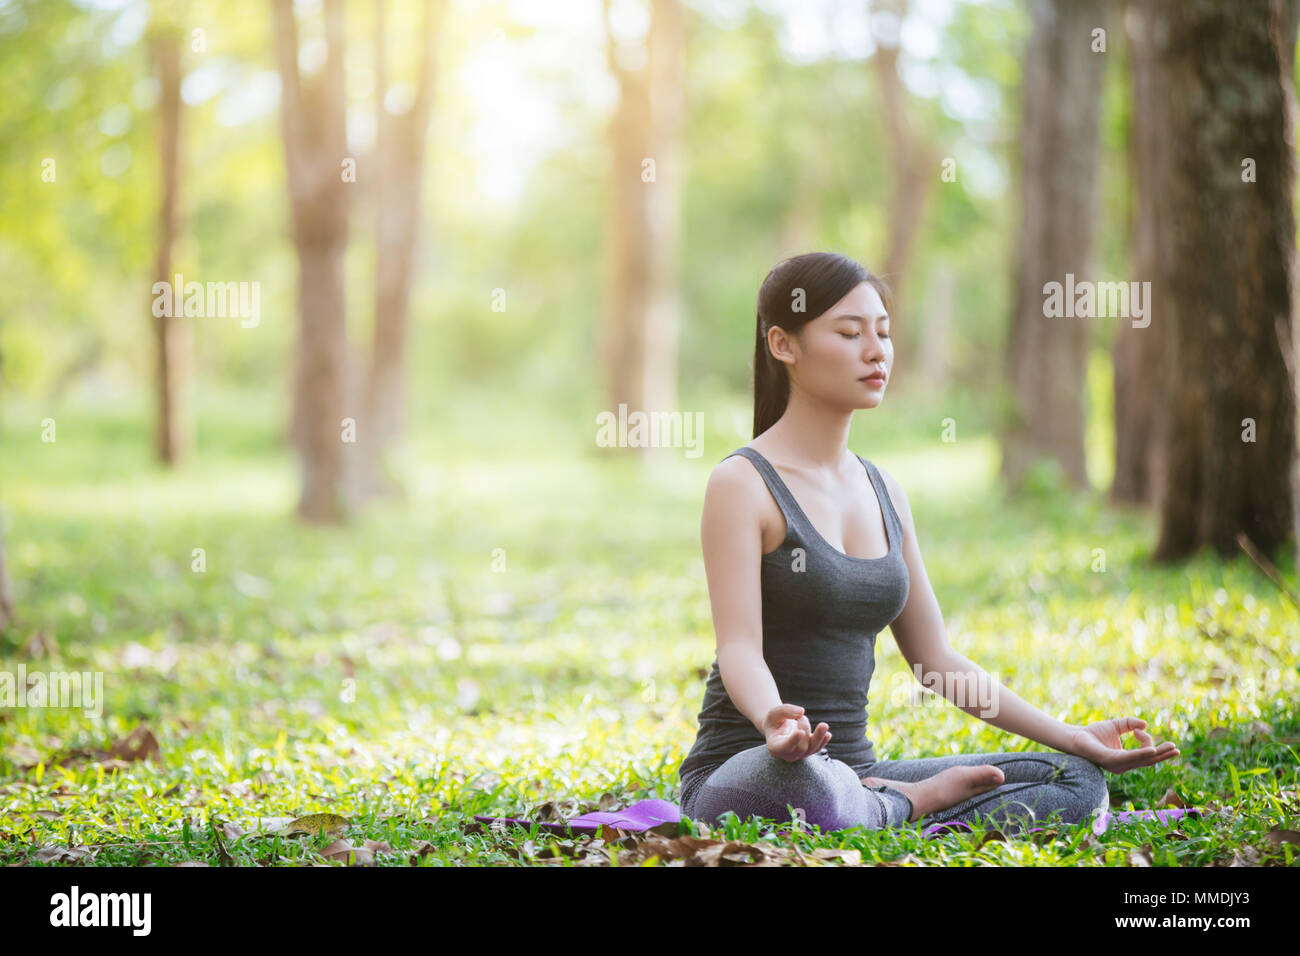 Lady practicing yoga in park outdoor, Meditation. Stock Photo